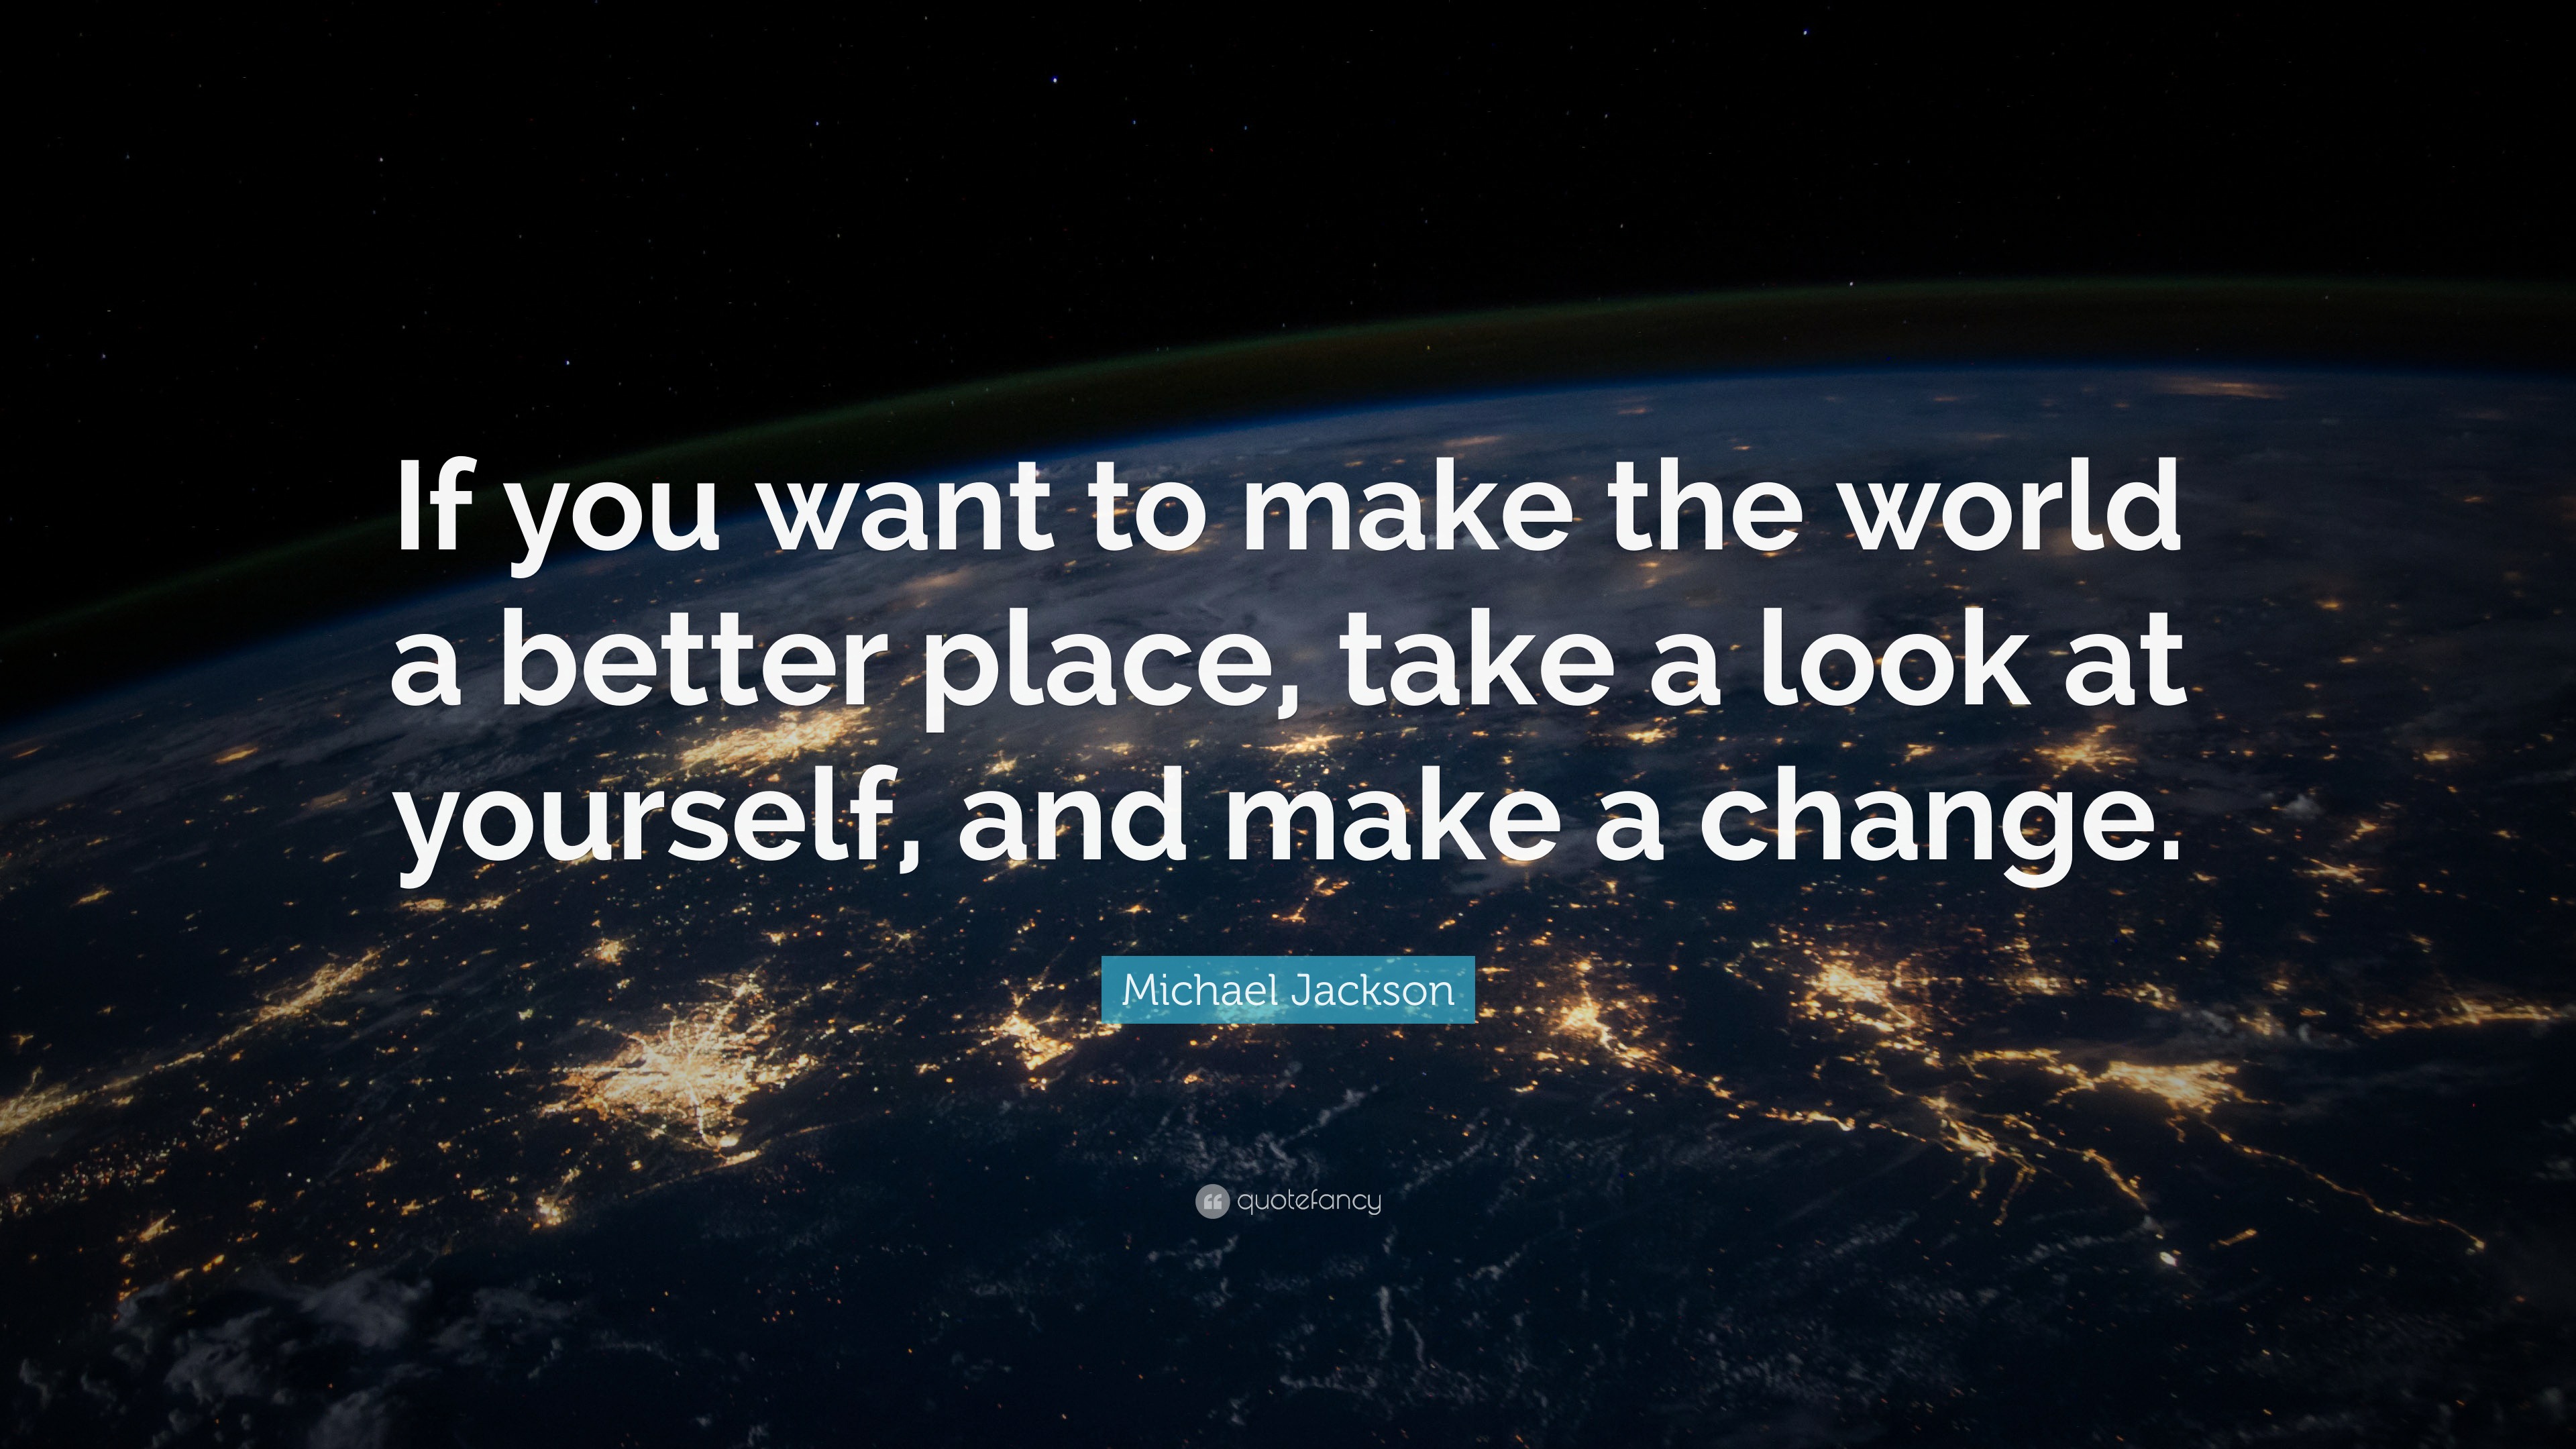 Making the world a better place quotes btc bahamas roaming